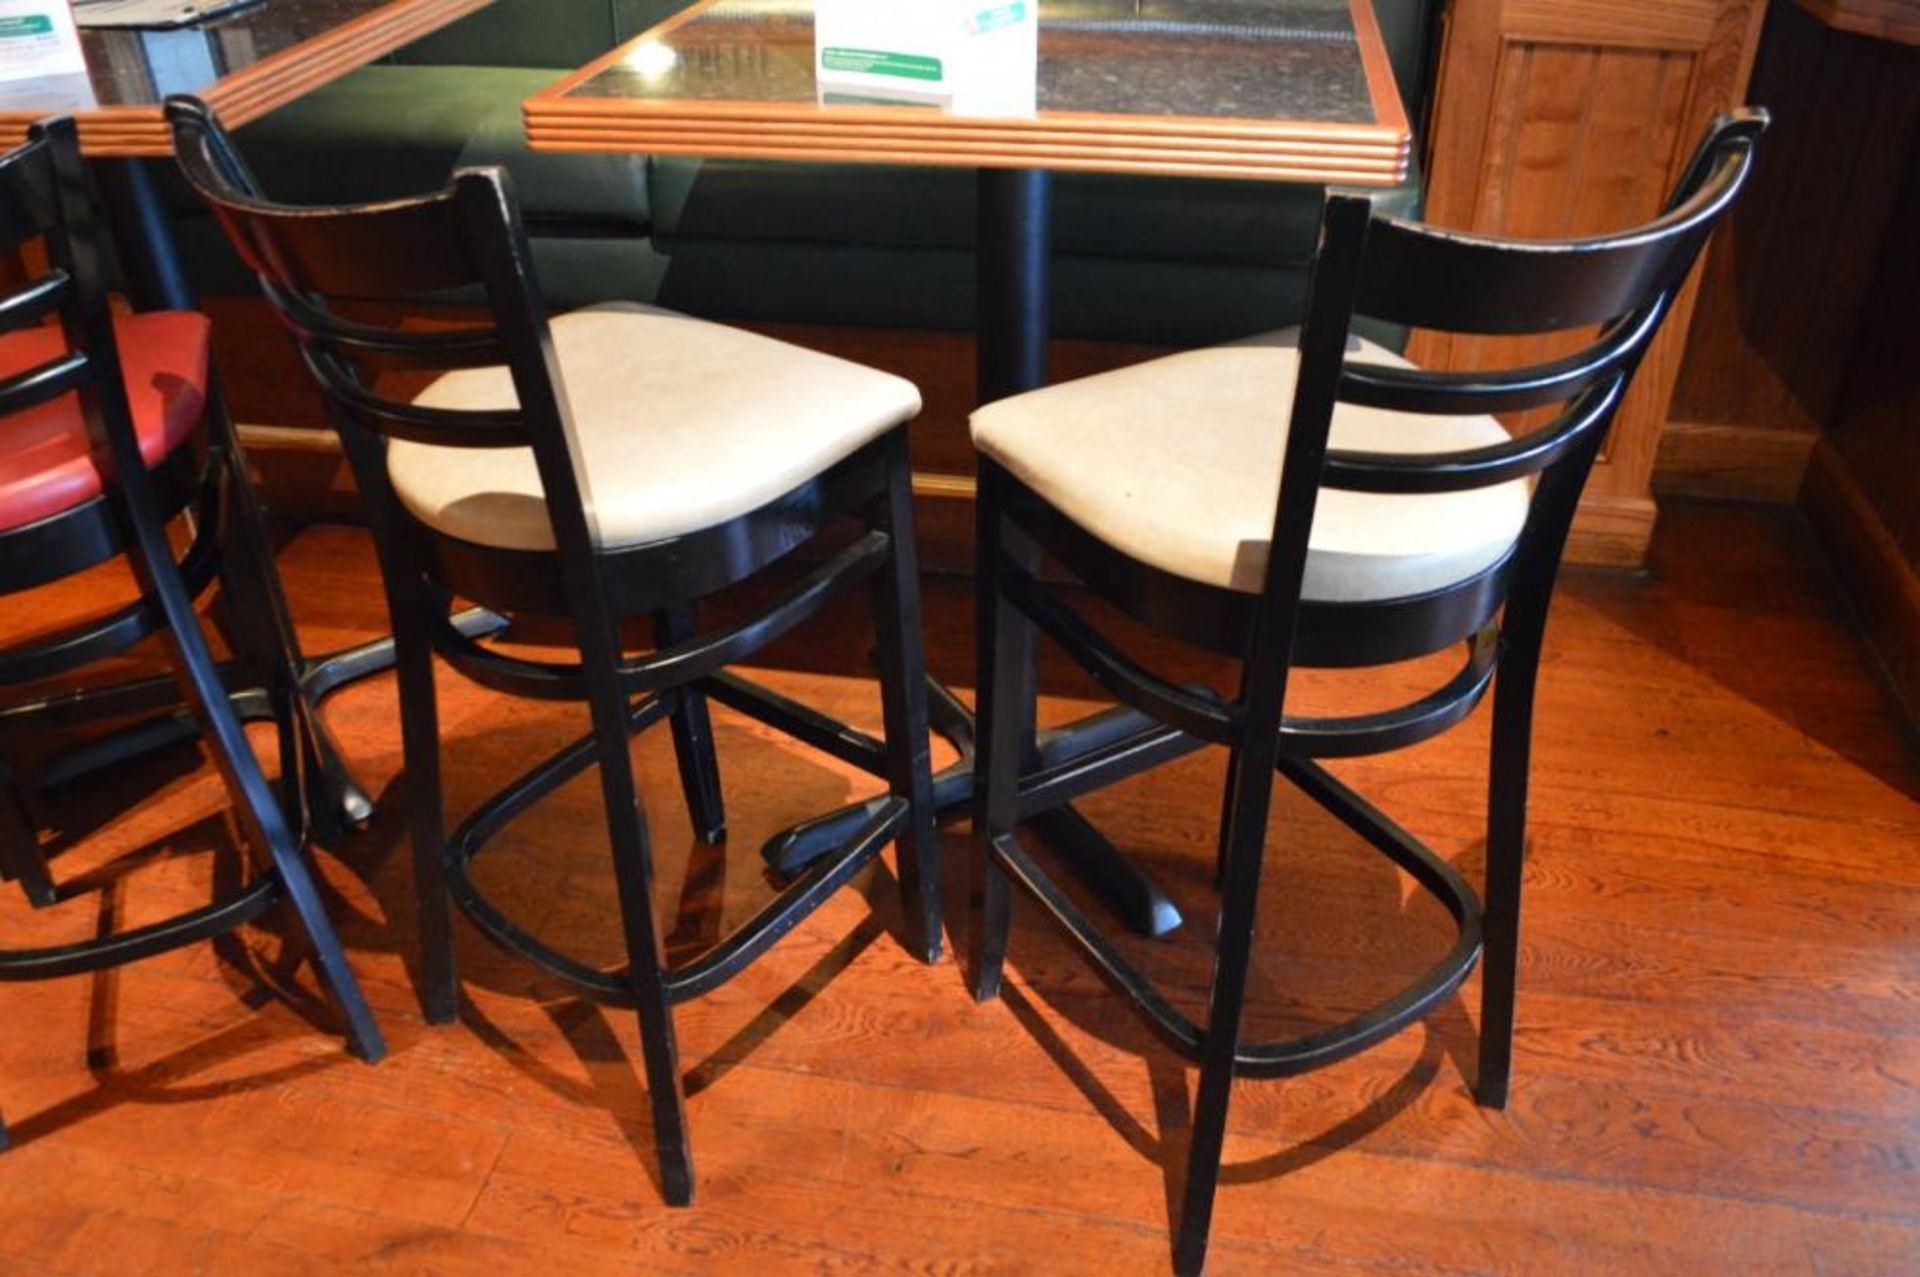 8 x Ladderback Bar Stools in Black and Cream and Red Faux Leather Seat Pads - CL357 - Location: Bolt - Image 2 of 9